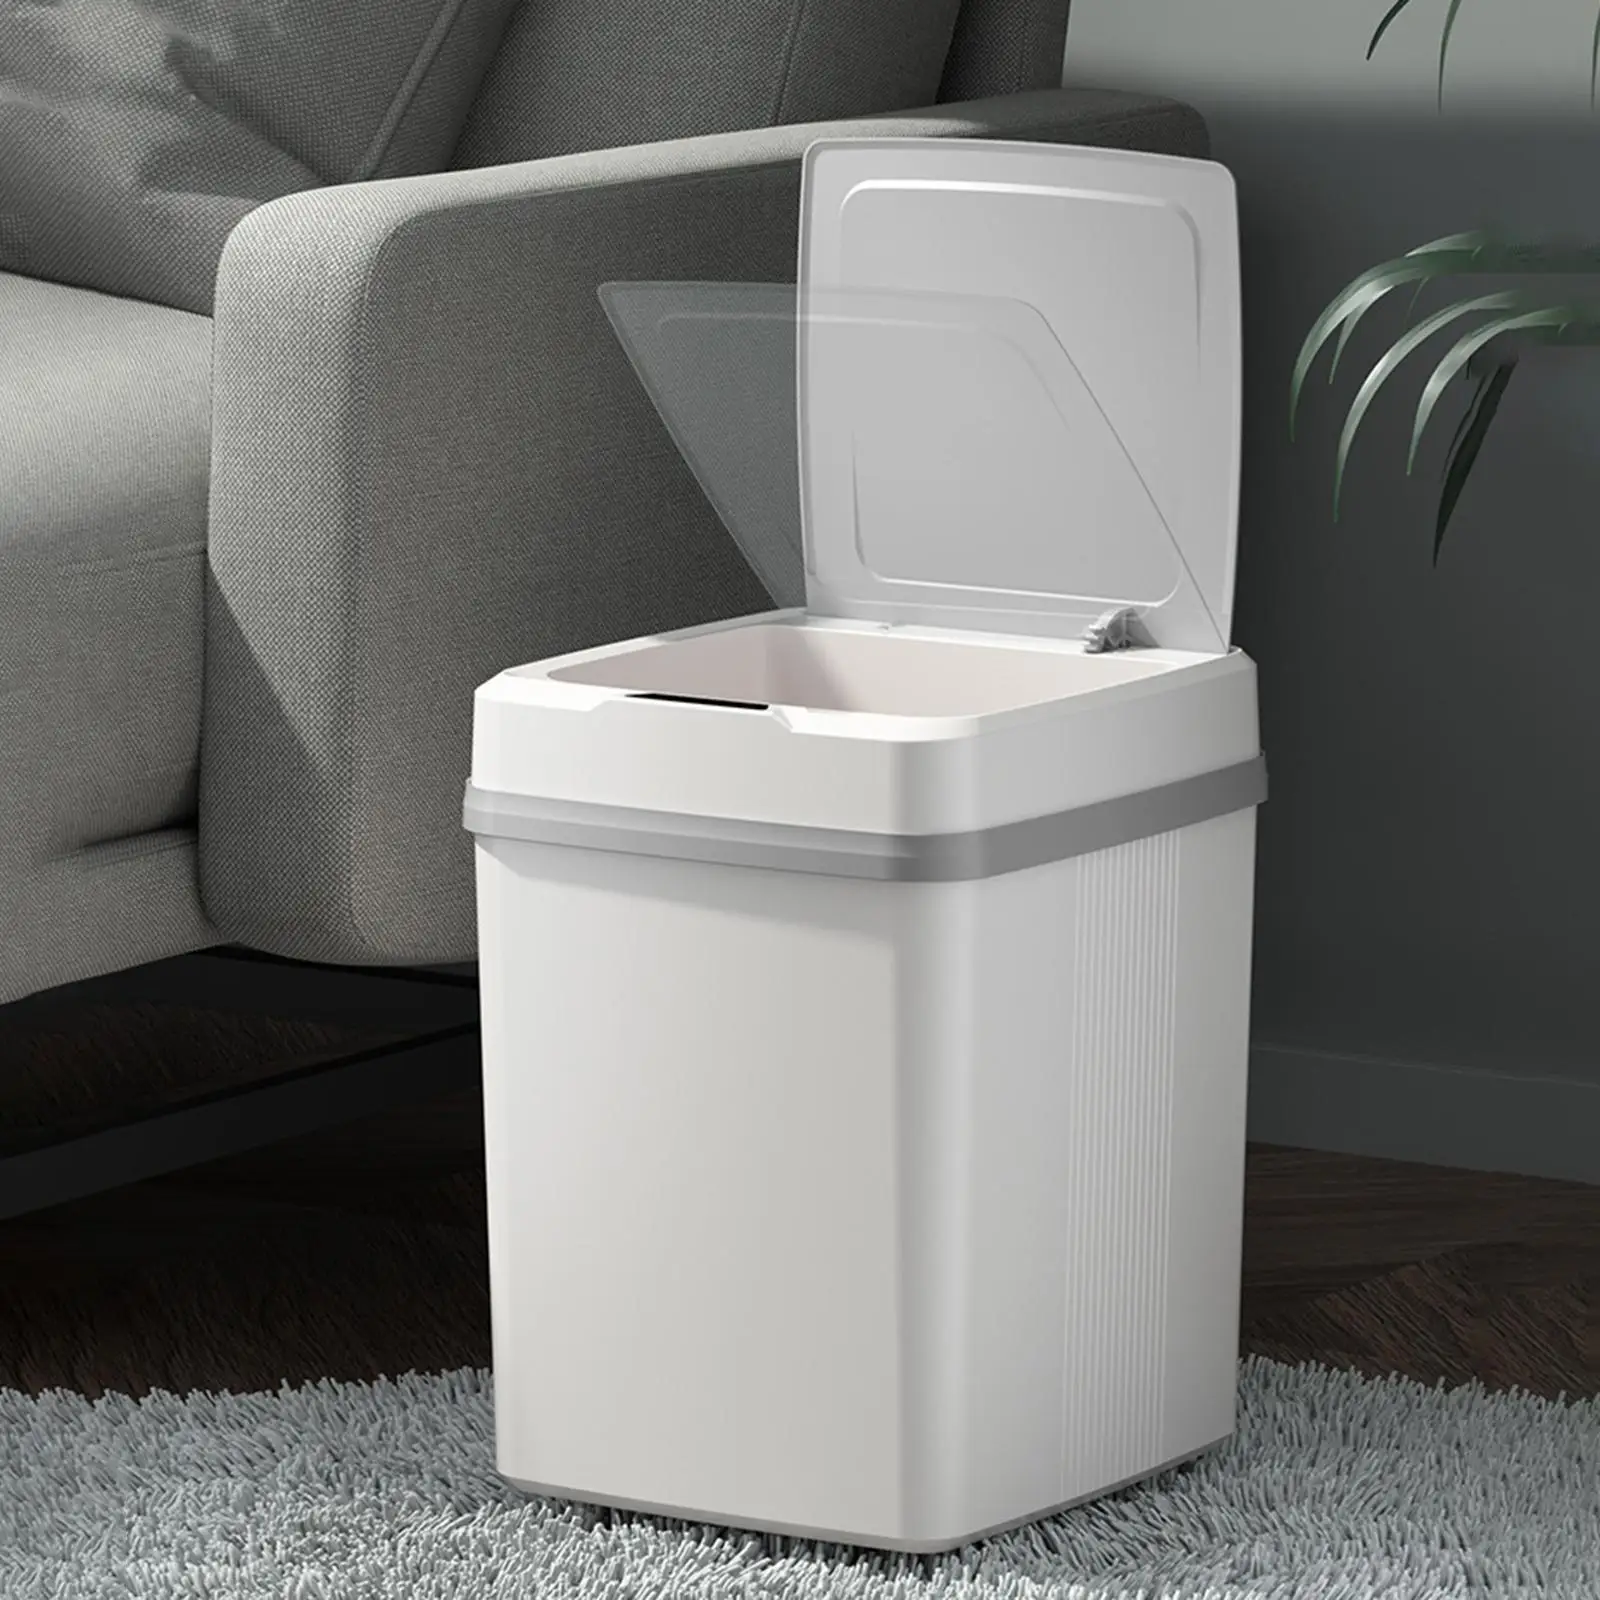 Waterproof Intelligent Garbage Bin with Lid Battery Operated 12L Motion Sensor Trash Can Household Dustbin for Living Room